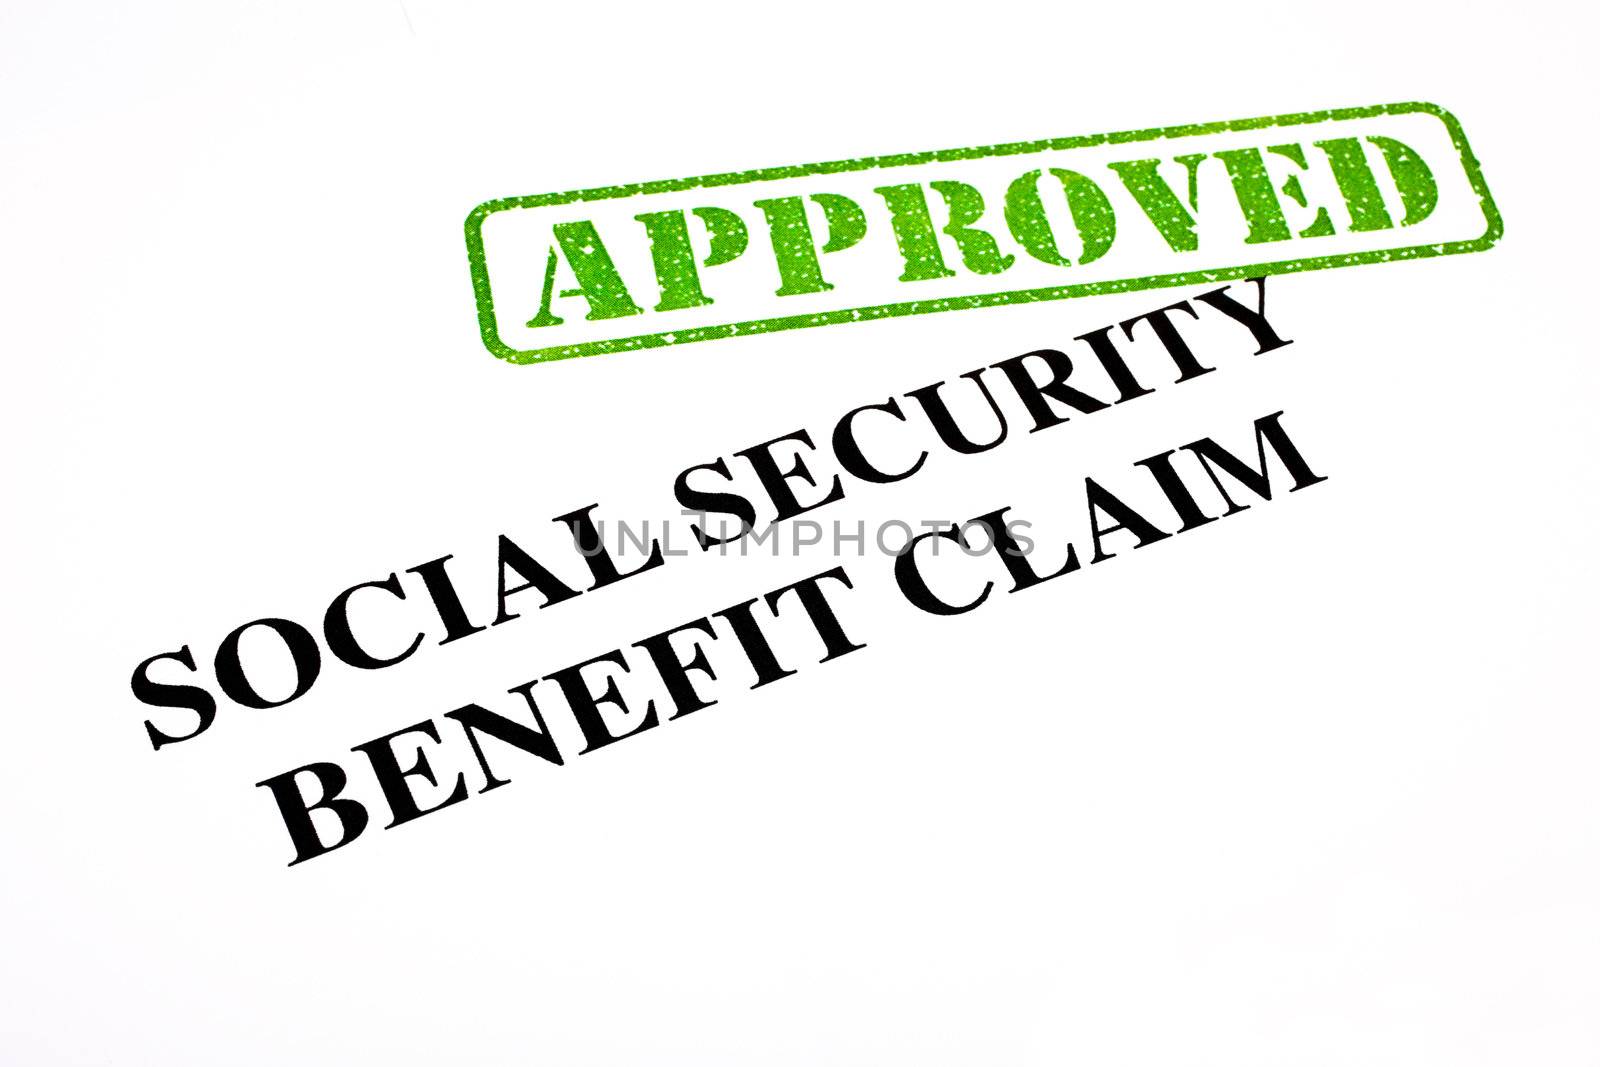 Social Security Benefit Claim APPROVED by chrisdorney